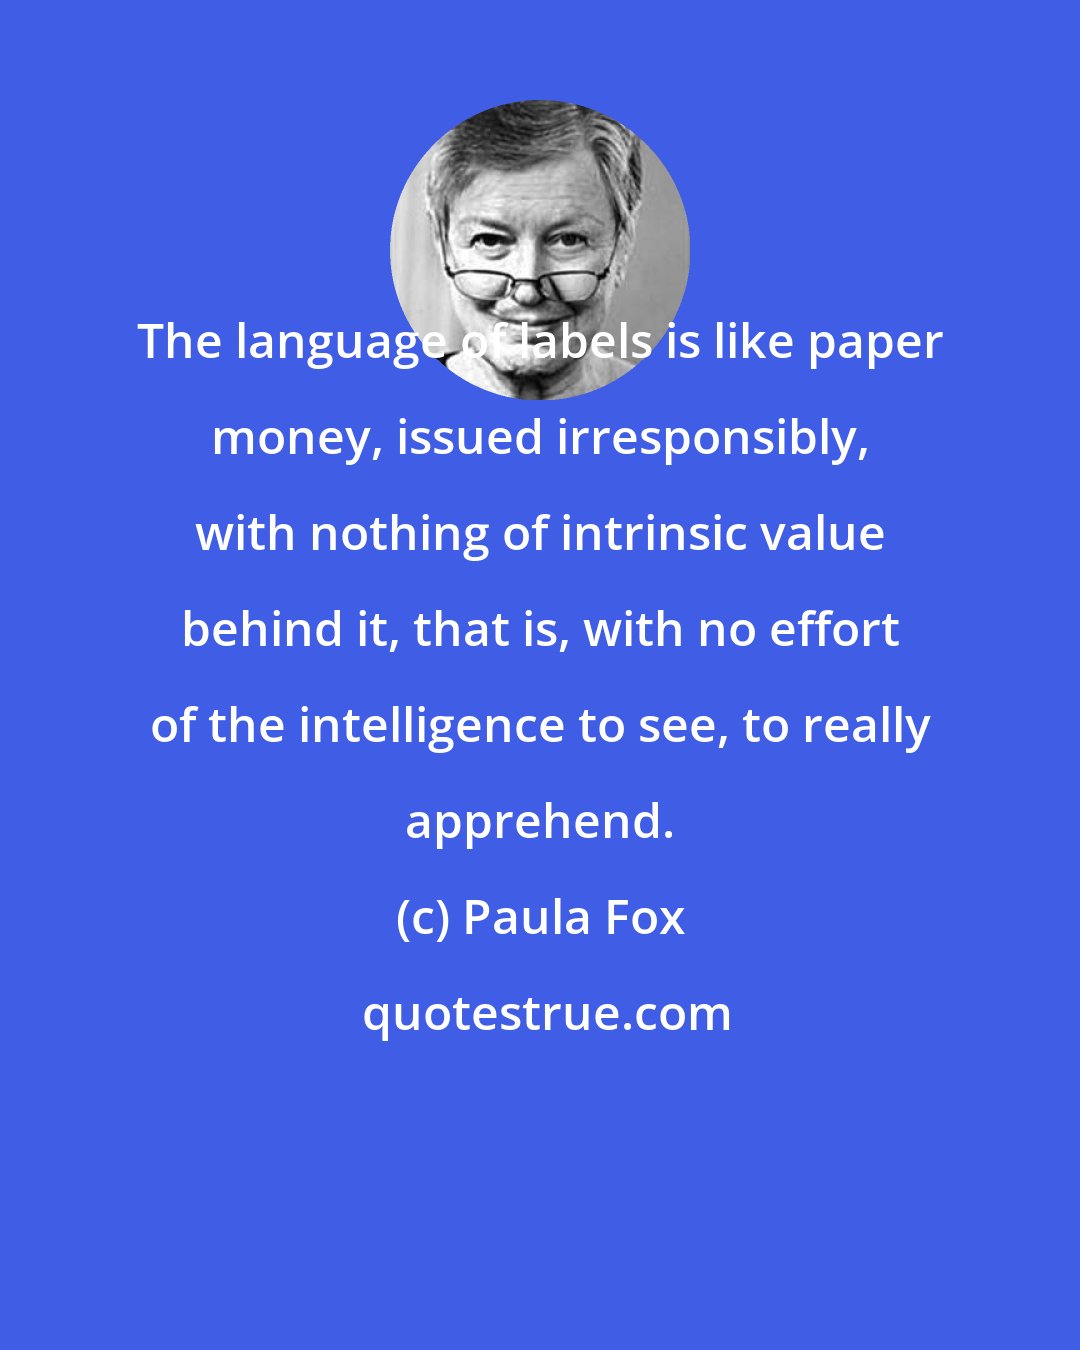 Paula Fox: The language of labels is like paper money, issued irresponsibly, with nothing of intrinsic value behind it, that is, with no effort of the intelligence to see, to really apprehend.